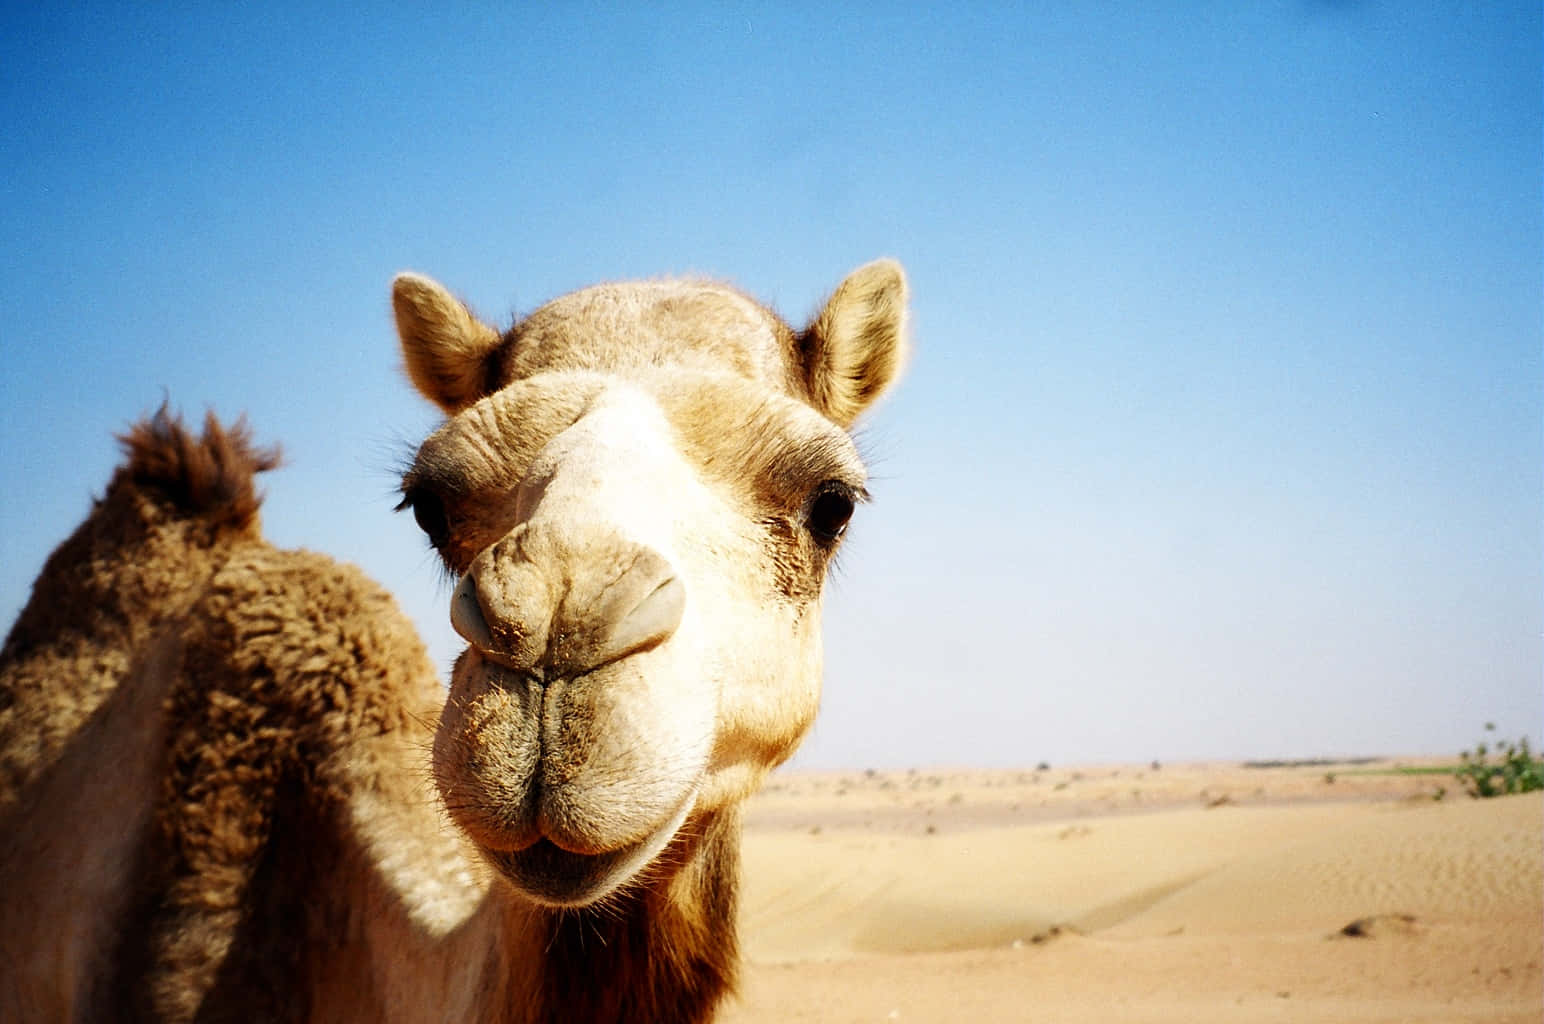 A majestic, gold-brown camel standing in the desert sand.